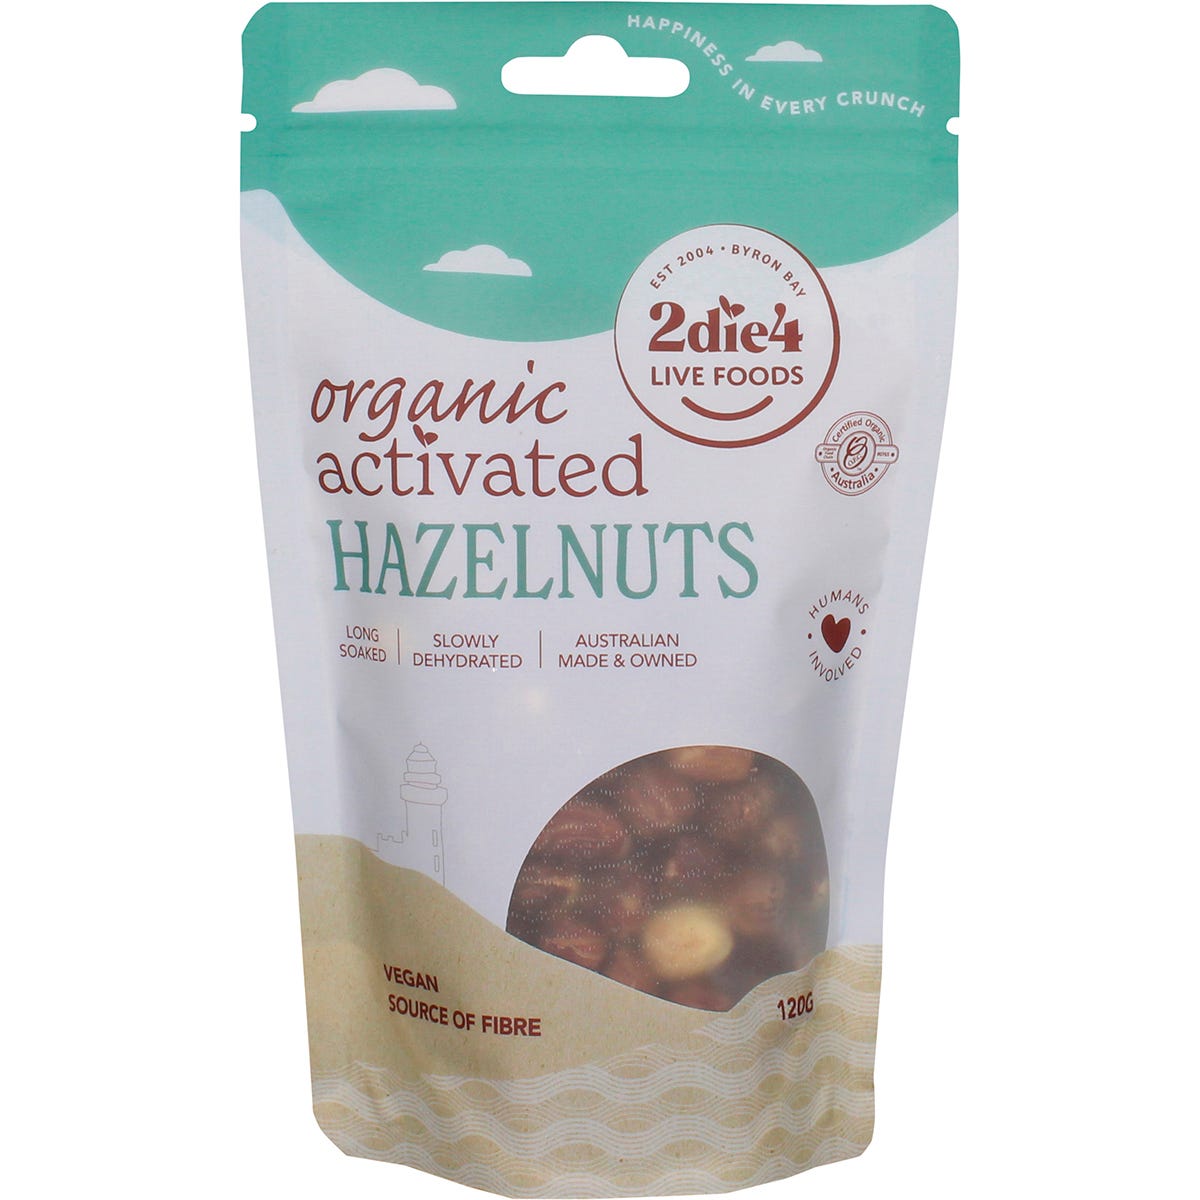 2die4 Live Foods Organic Activated Hazelnuts 120g - Dr Earth - Dried Fruits Nuts & Seeds